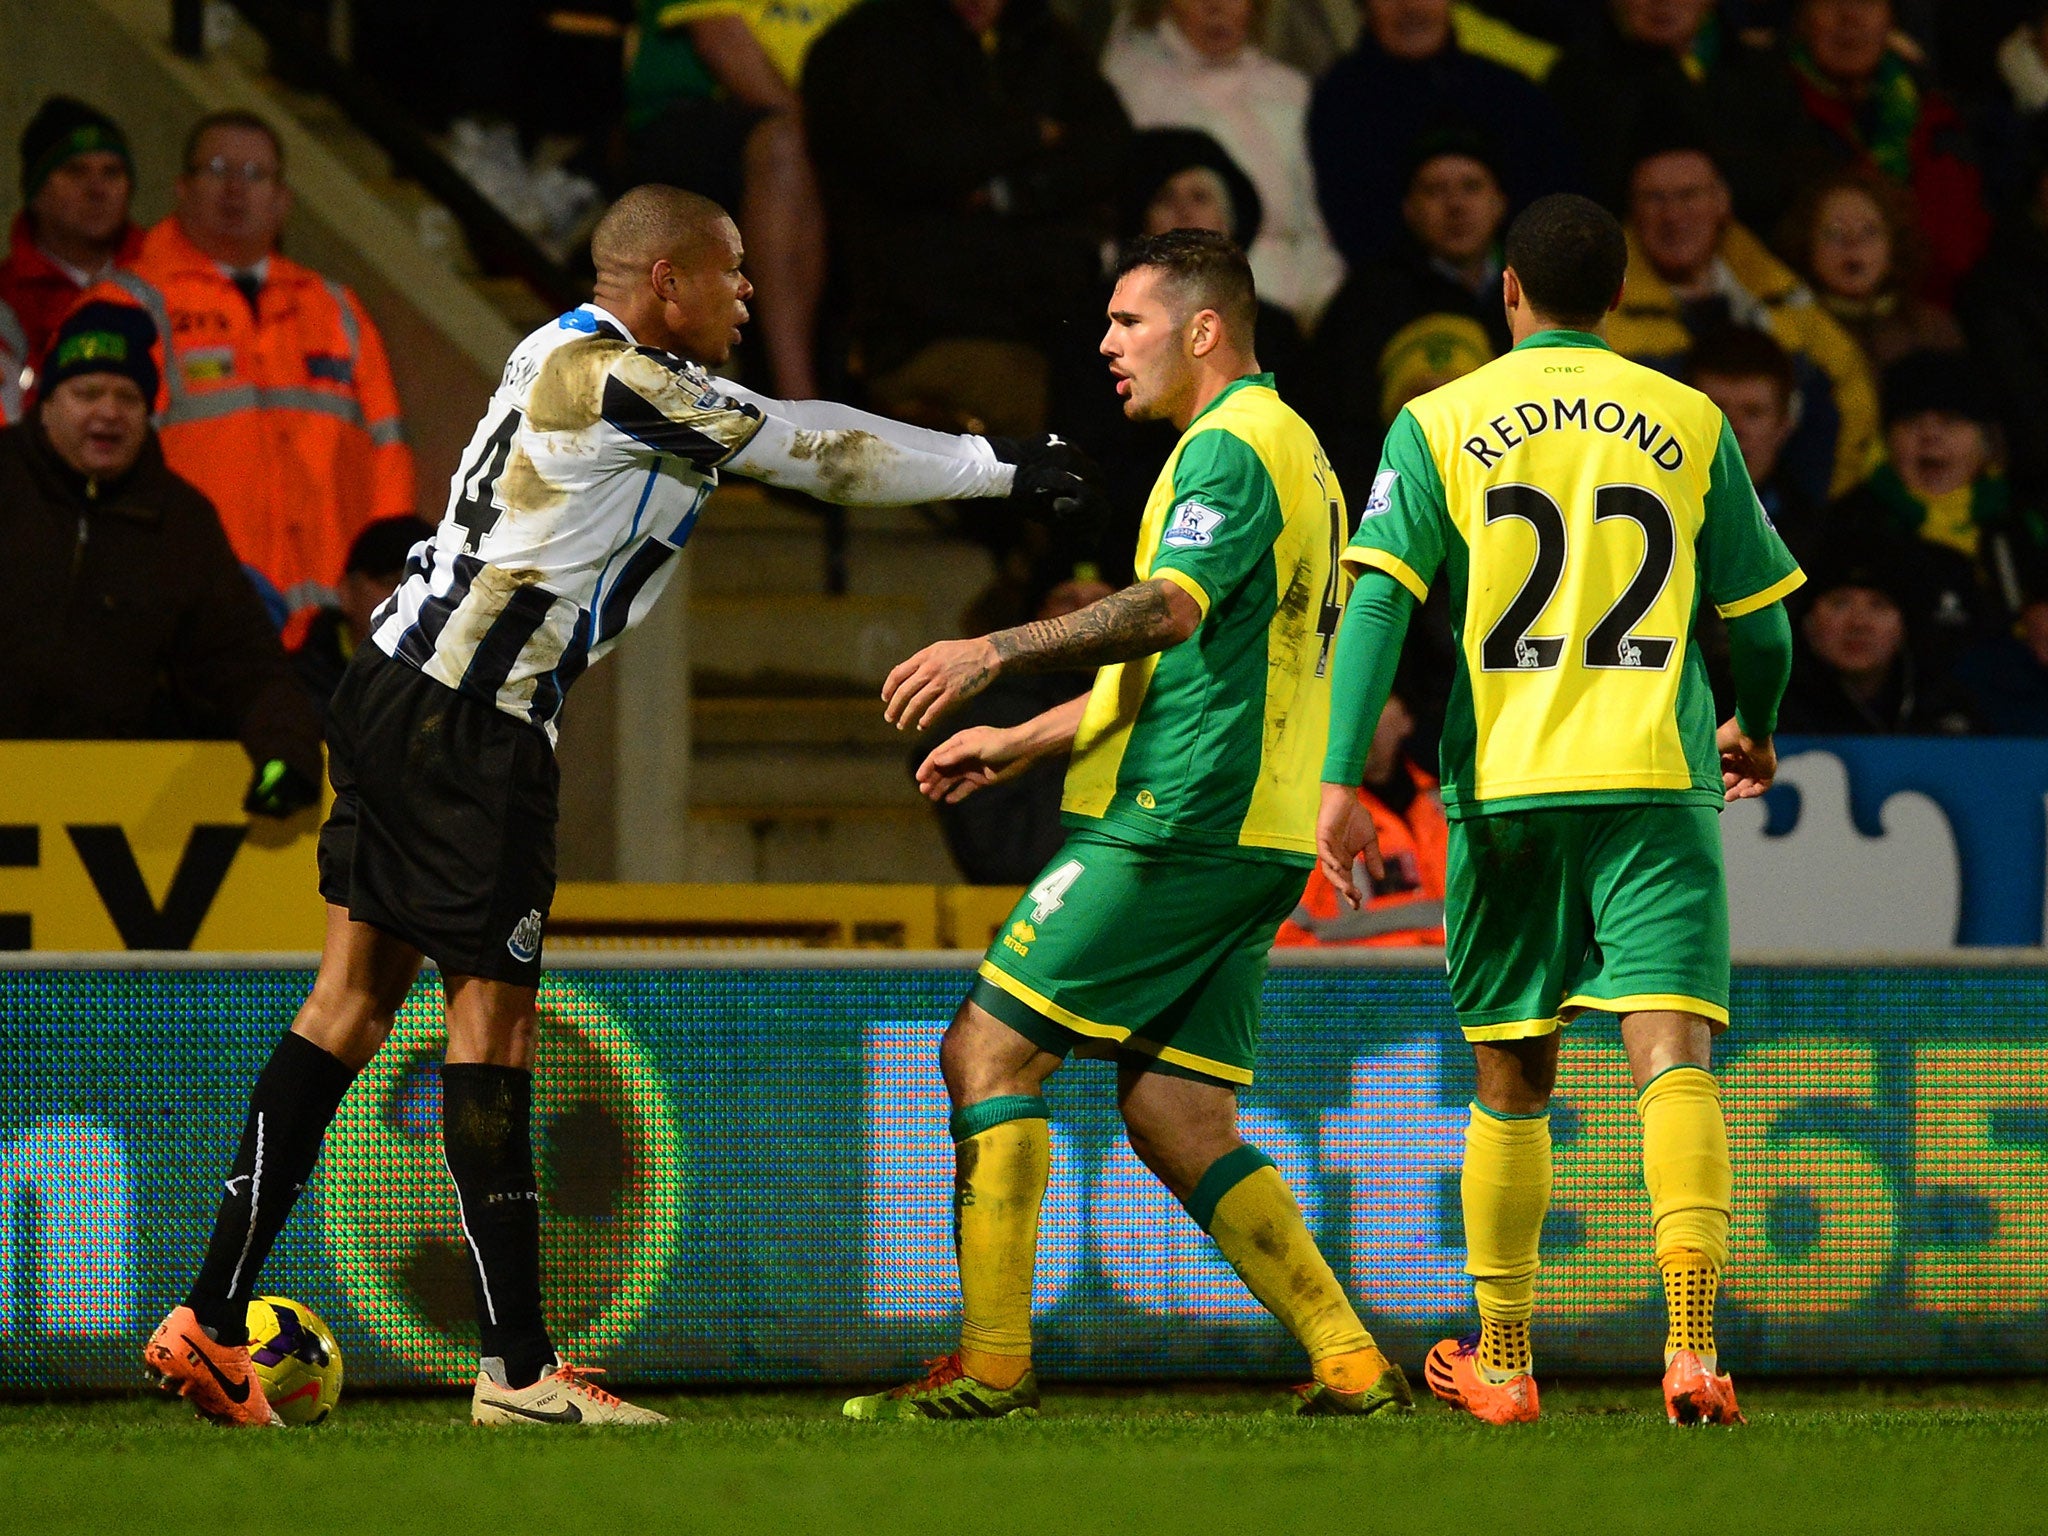 Loic Remy of Newcastle United and Bradley Johnson of Norwich City come to blows